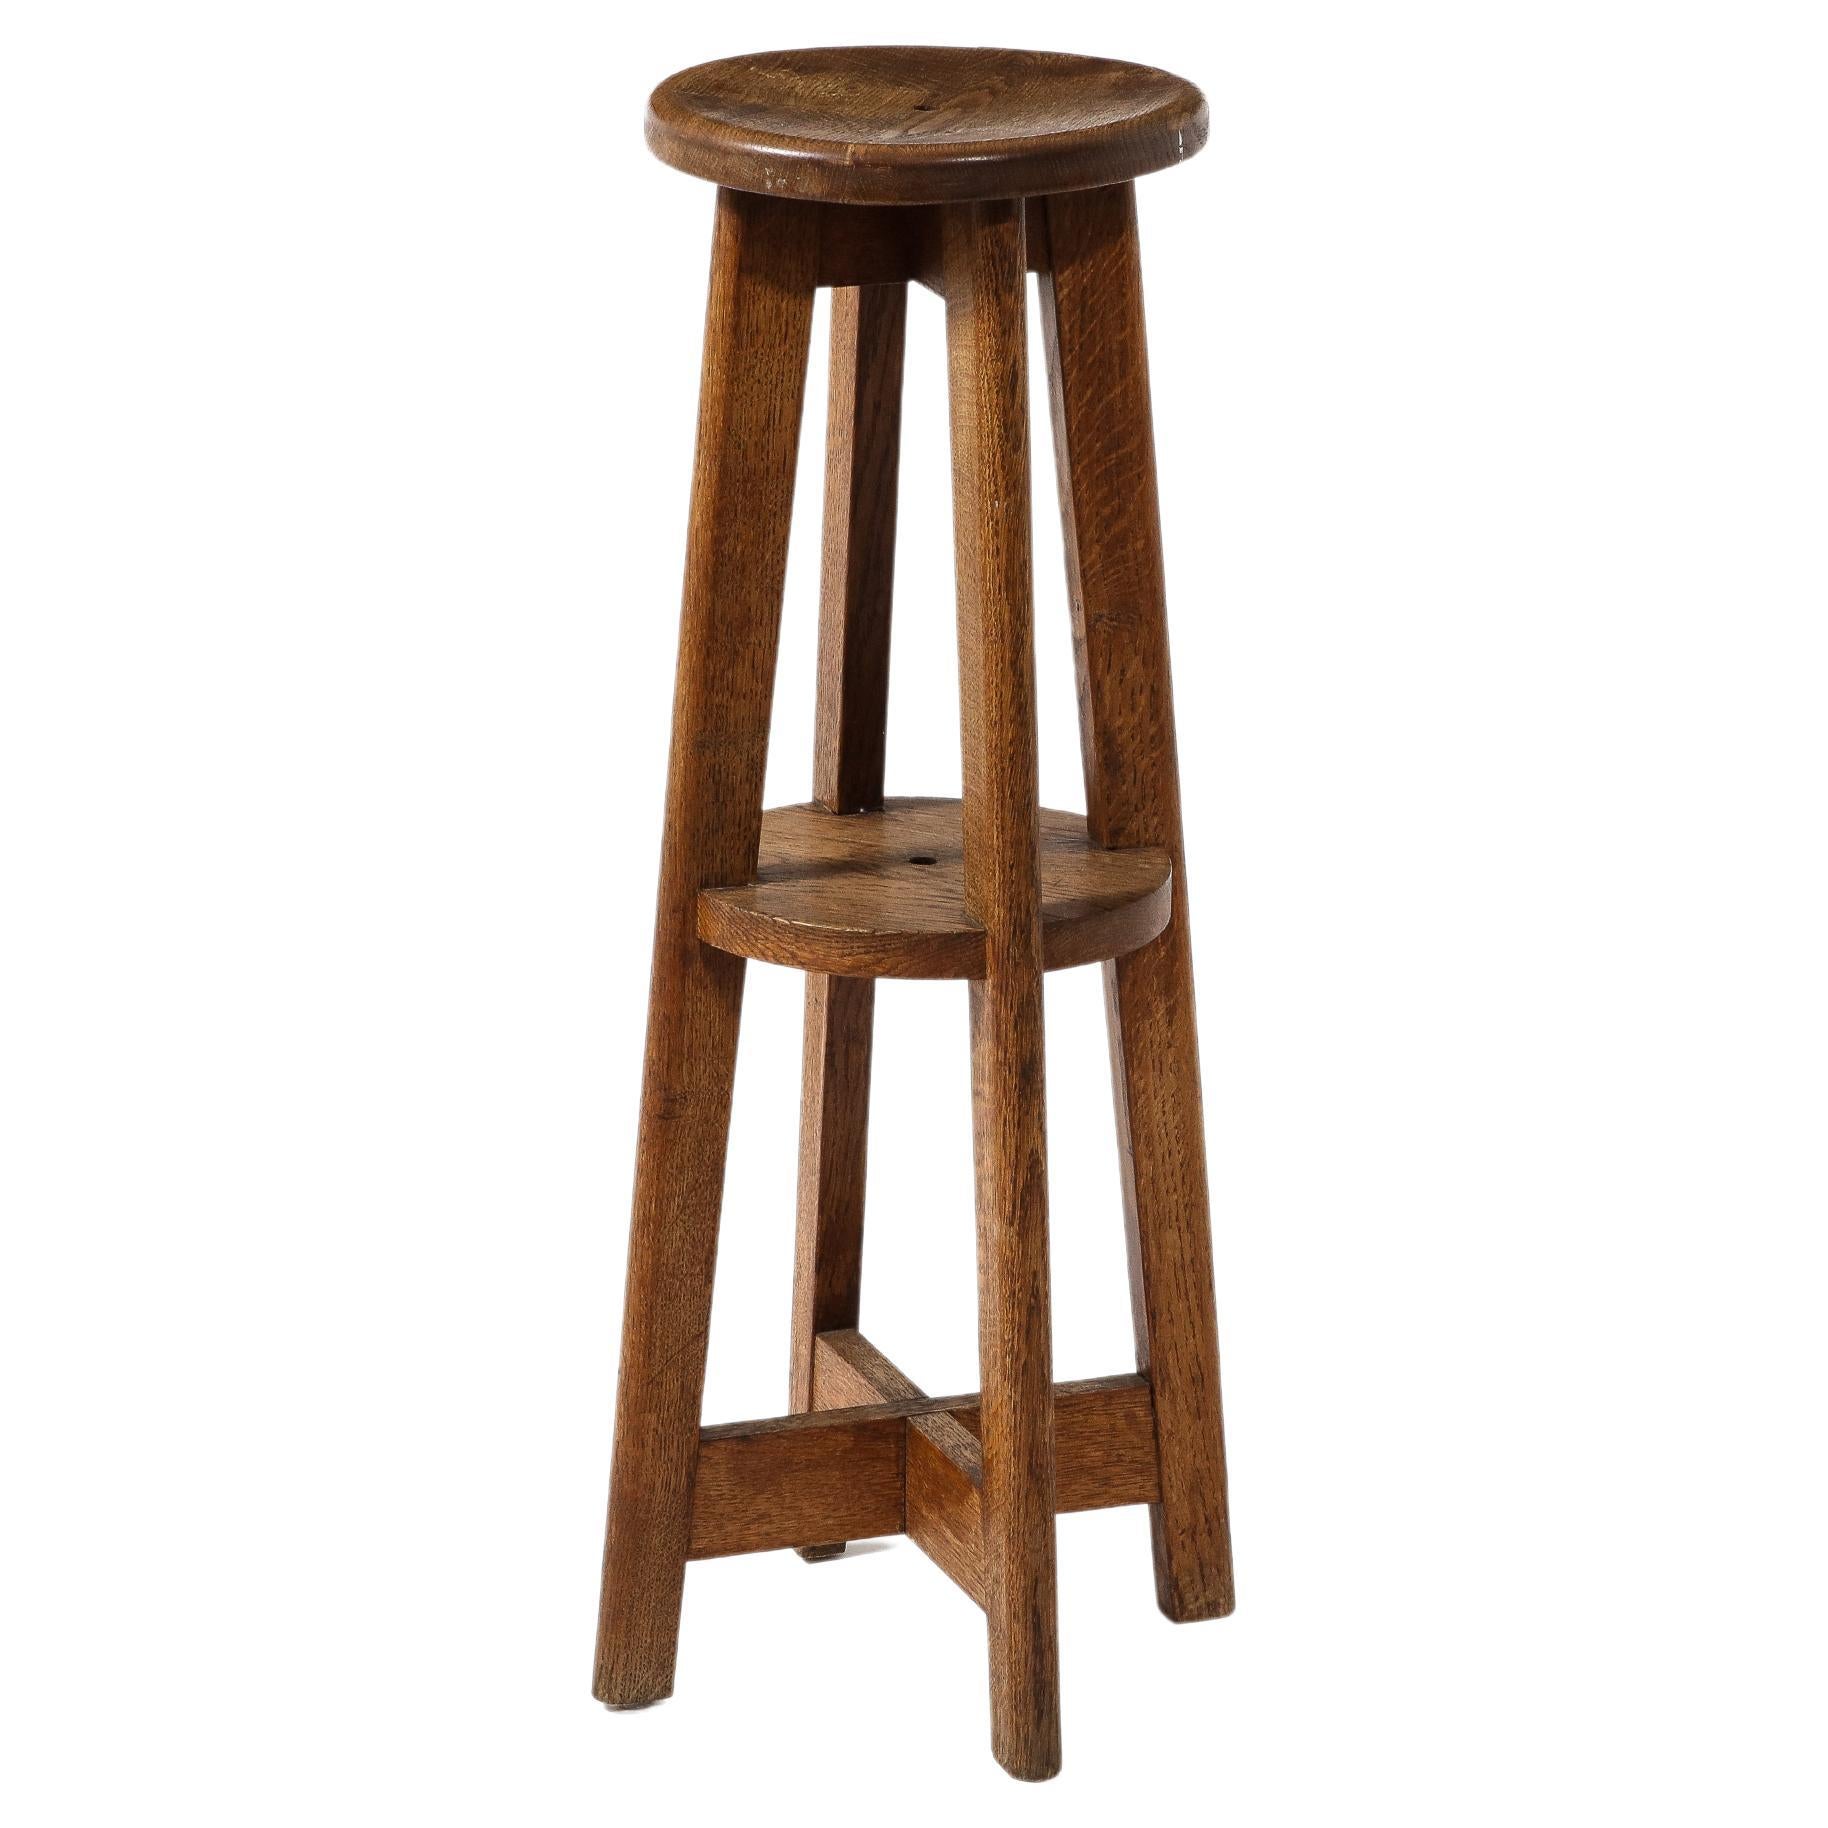 Tall Rustic Farm Stool or Pedestal in Solid Oak, France 1950's For Sale